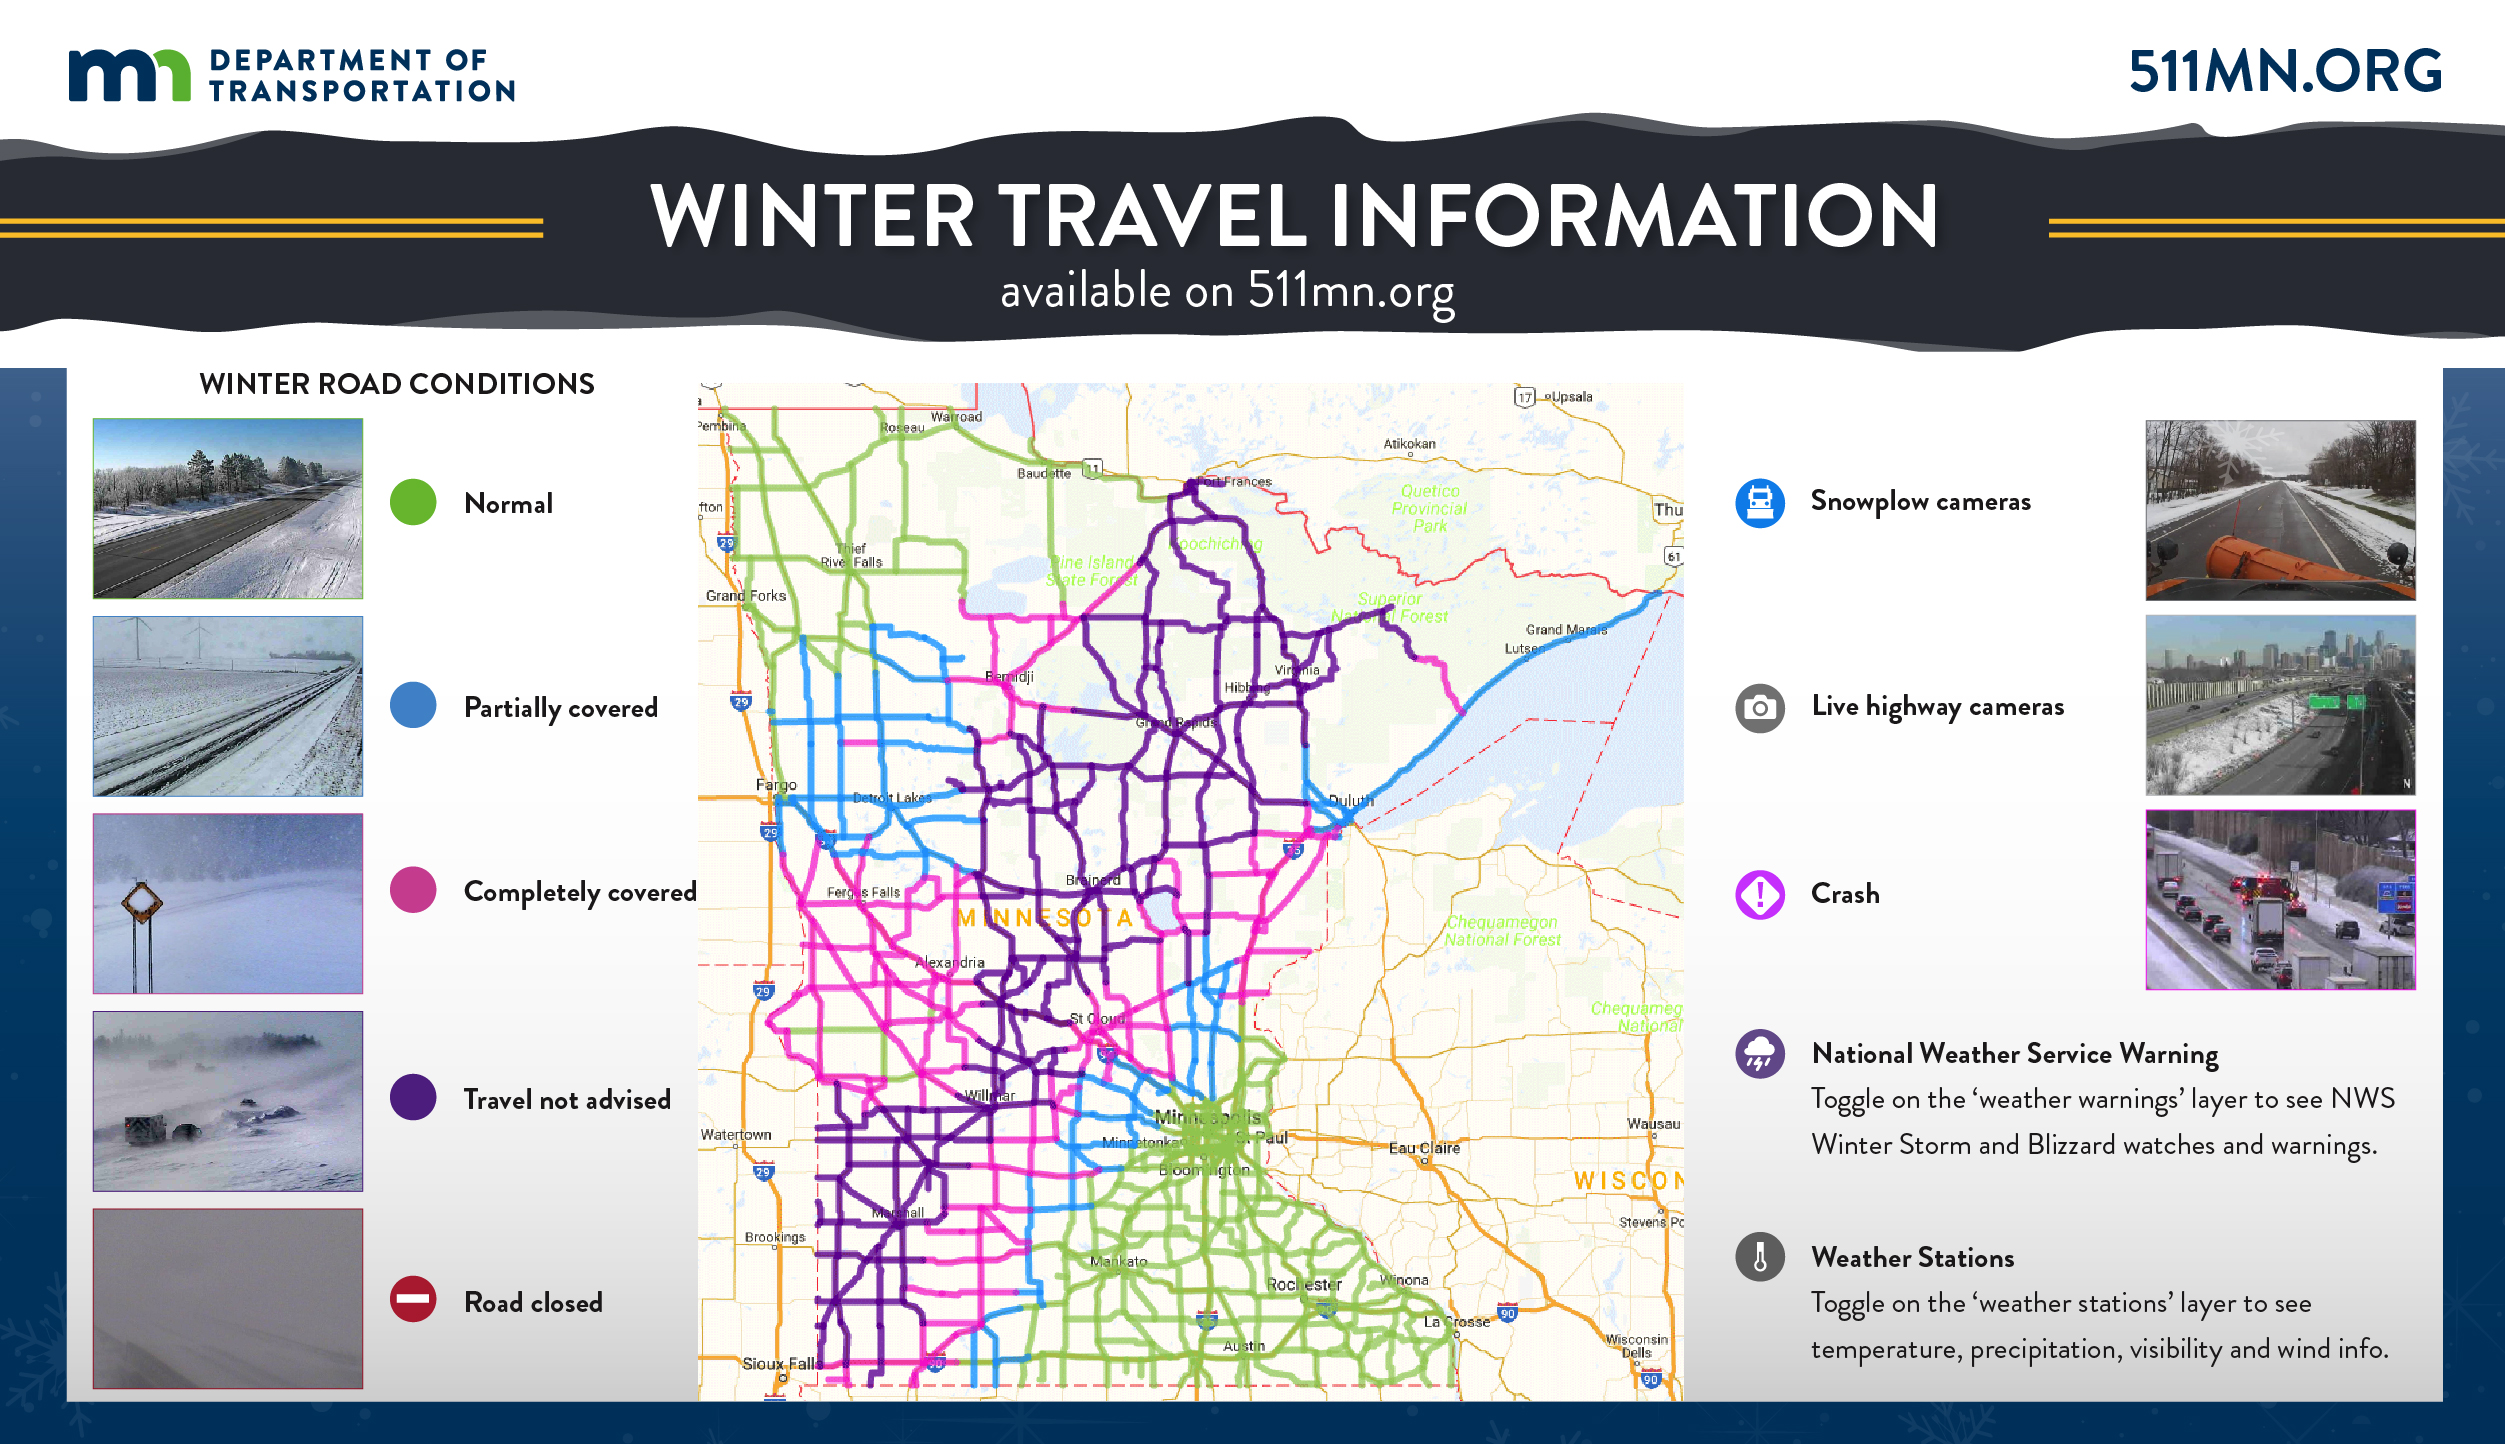 Winter travel information is available at 511mn.org. Normal road conditions are colored green, partially covered are listed in blue, completely covered roads are colored pink and no travel advised roads are colored in purple